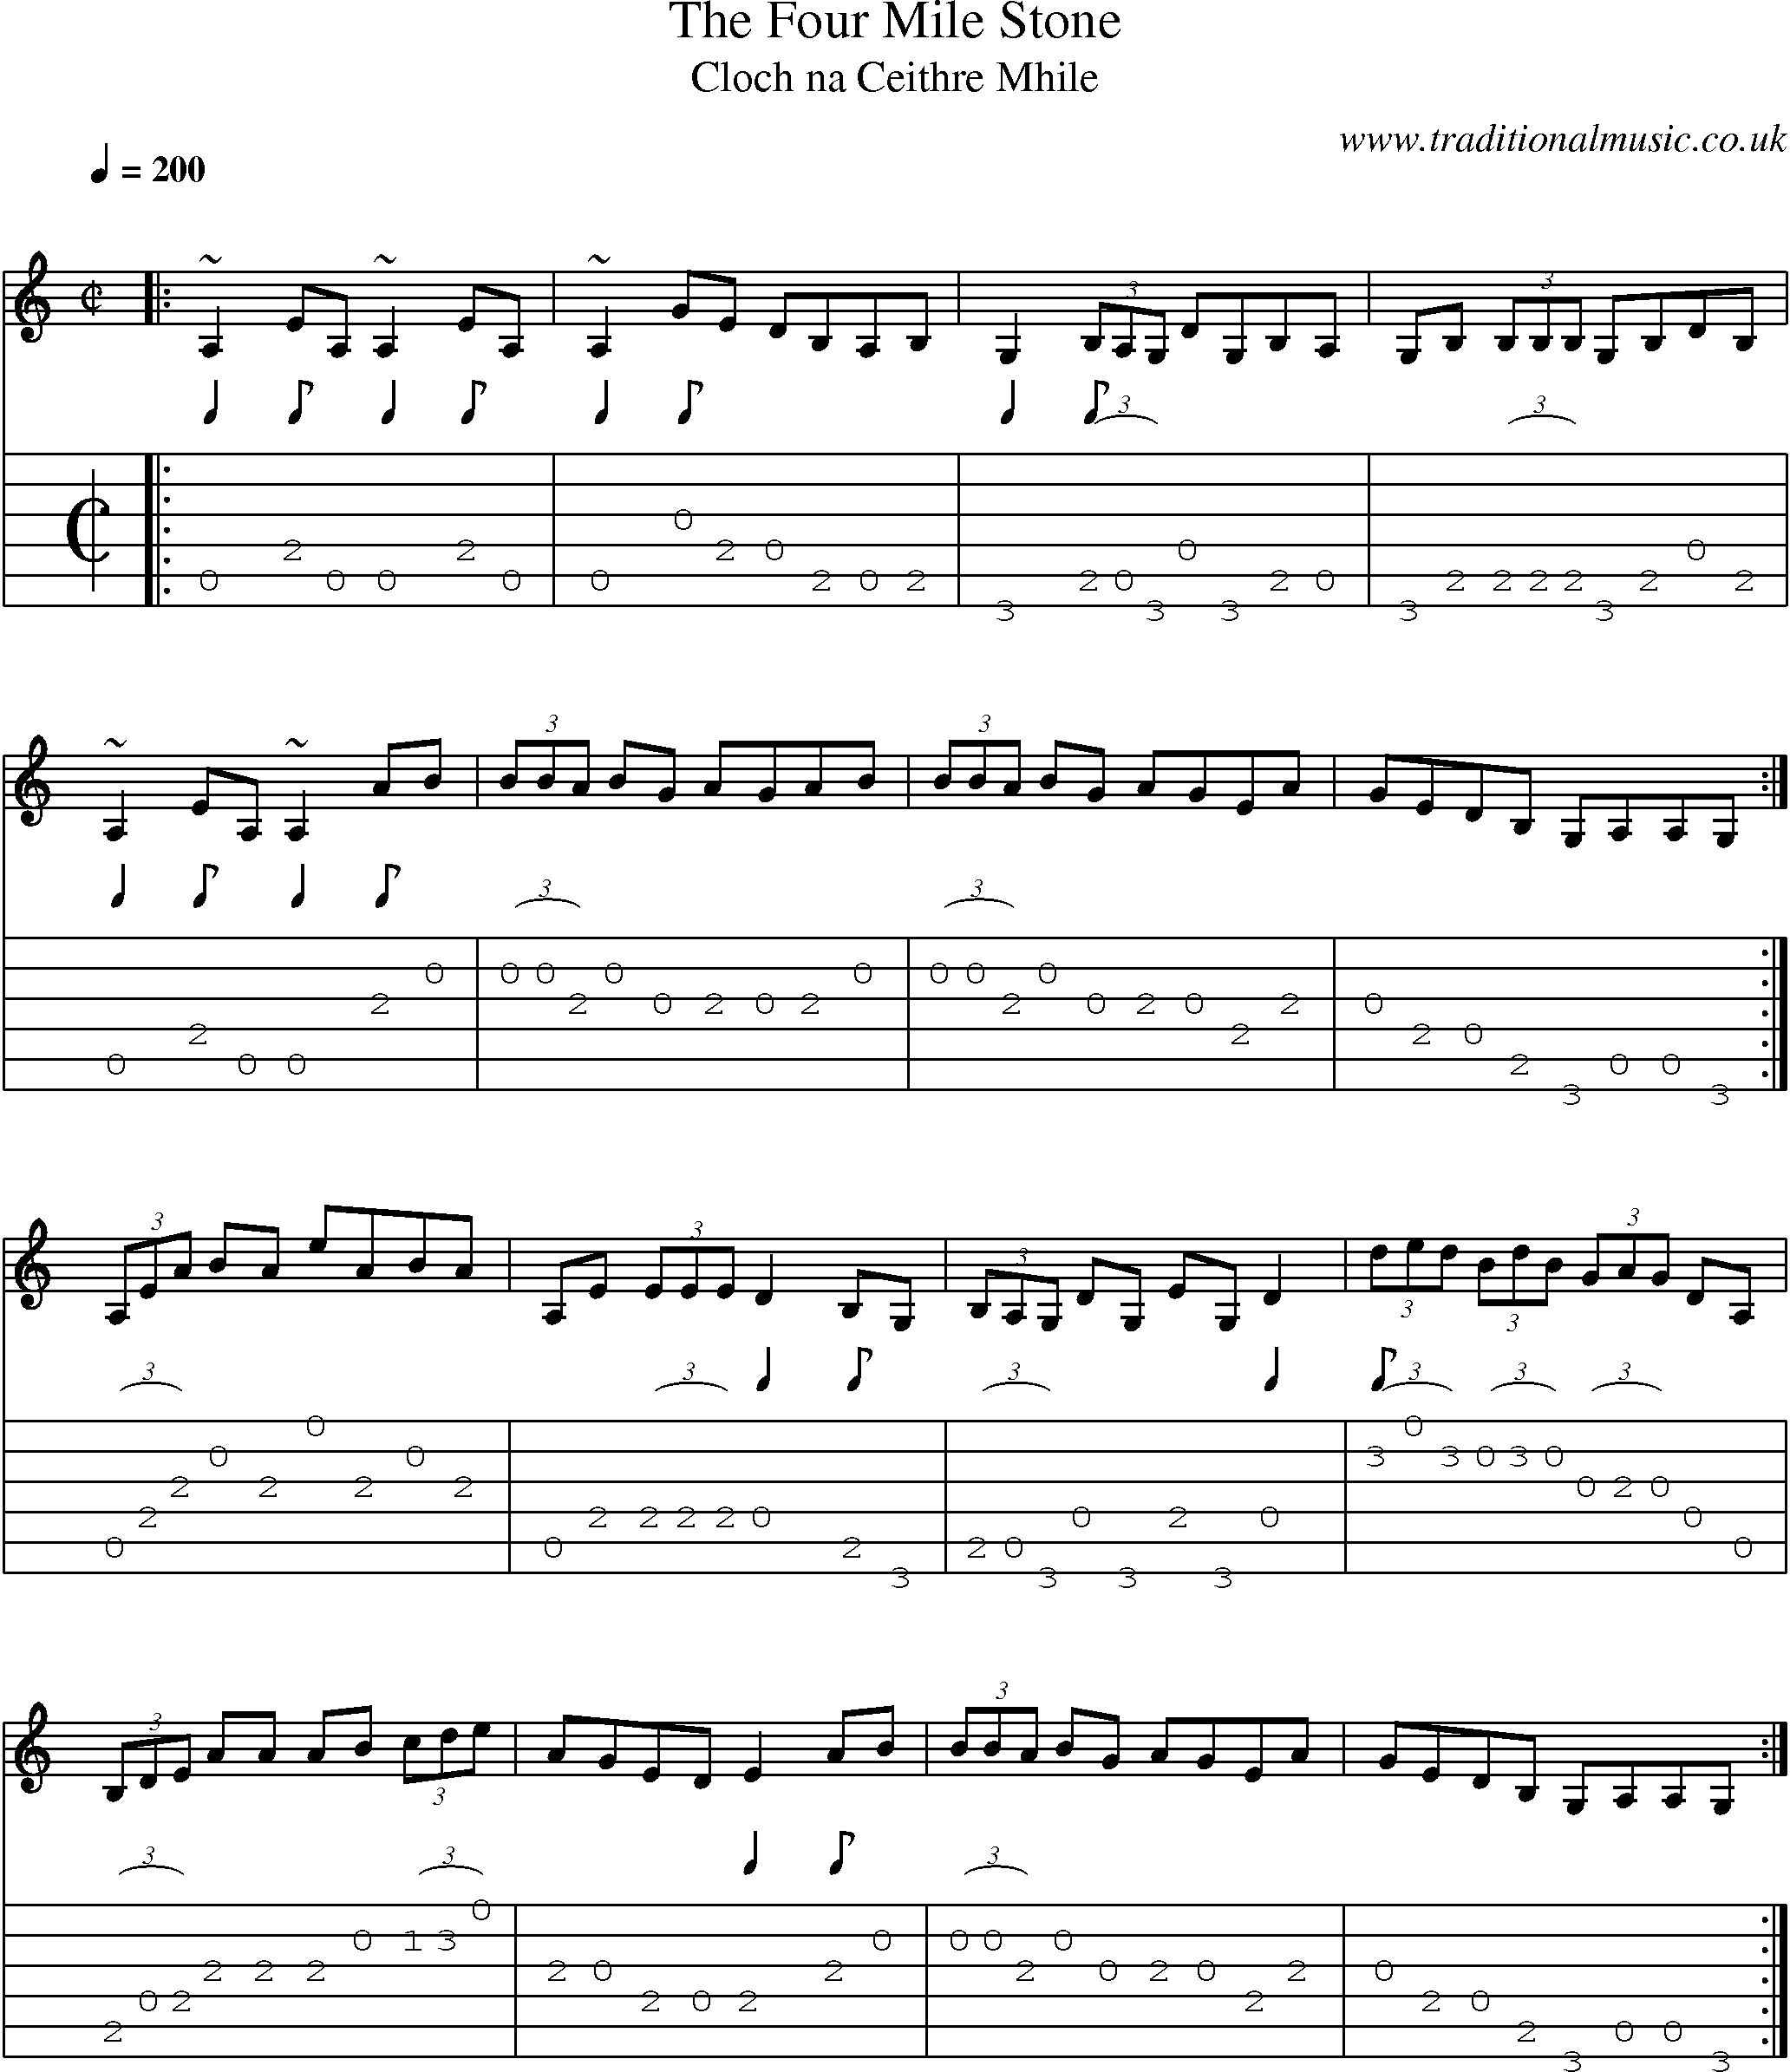 Music Score and Guitar Tabs for The Four Mile Stone